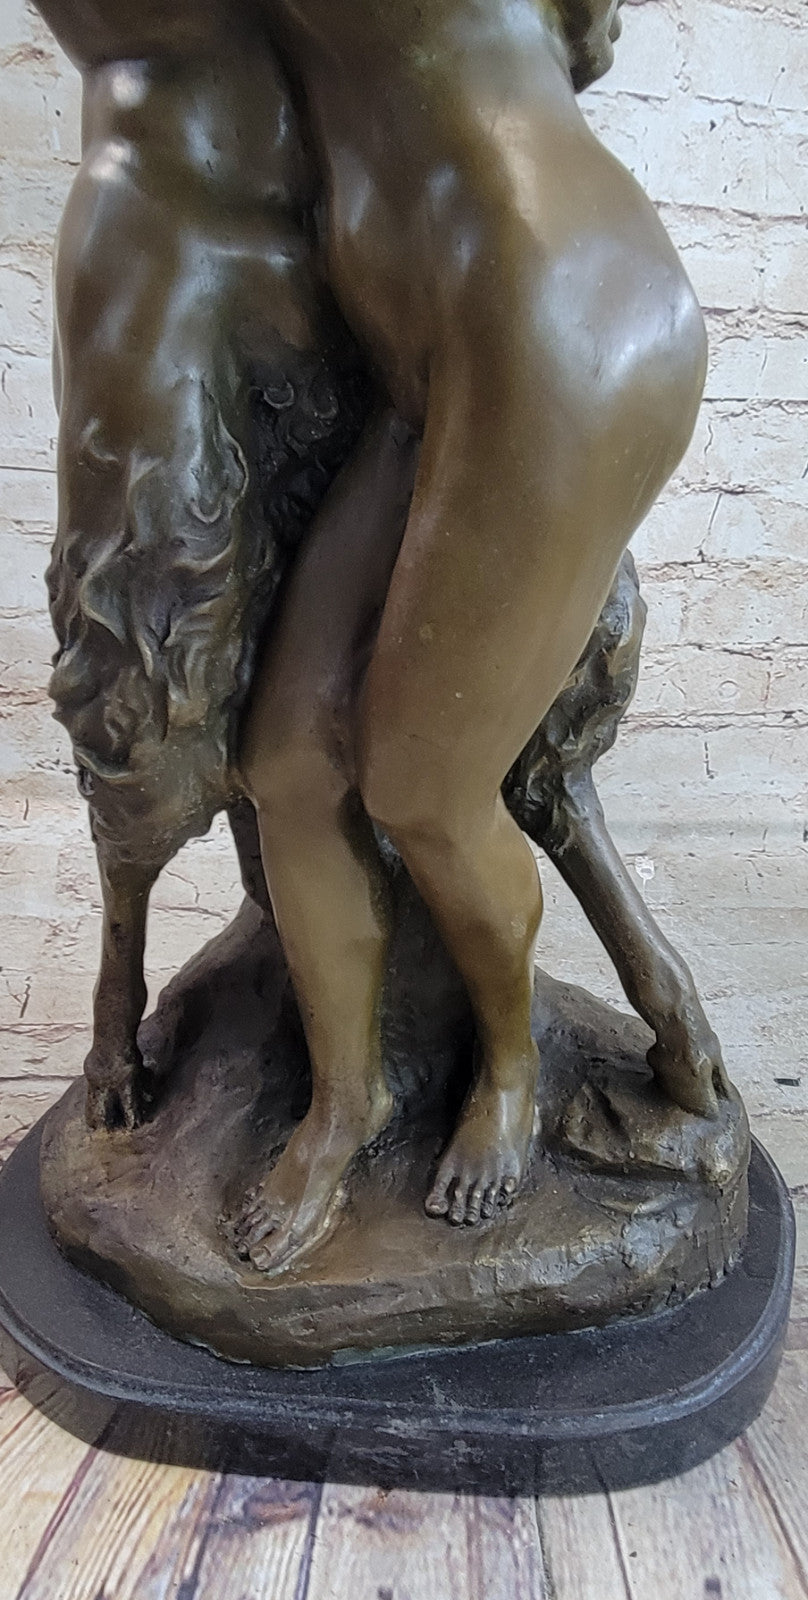 Greek God Pan Faun charms his way in the Arms of a Nude Woman  Bronze Statue